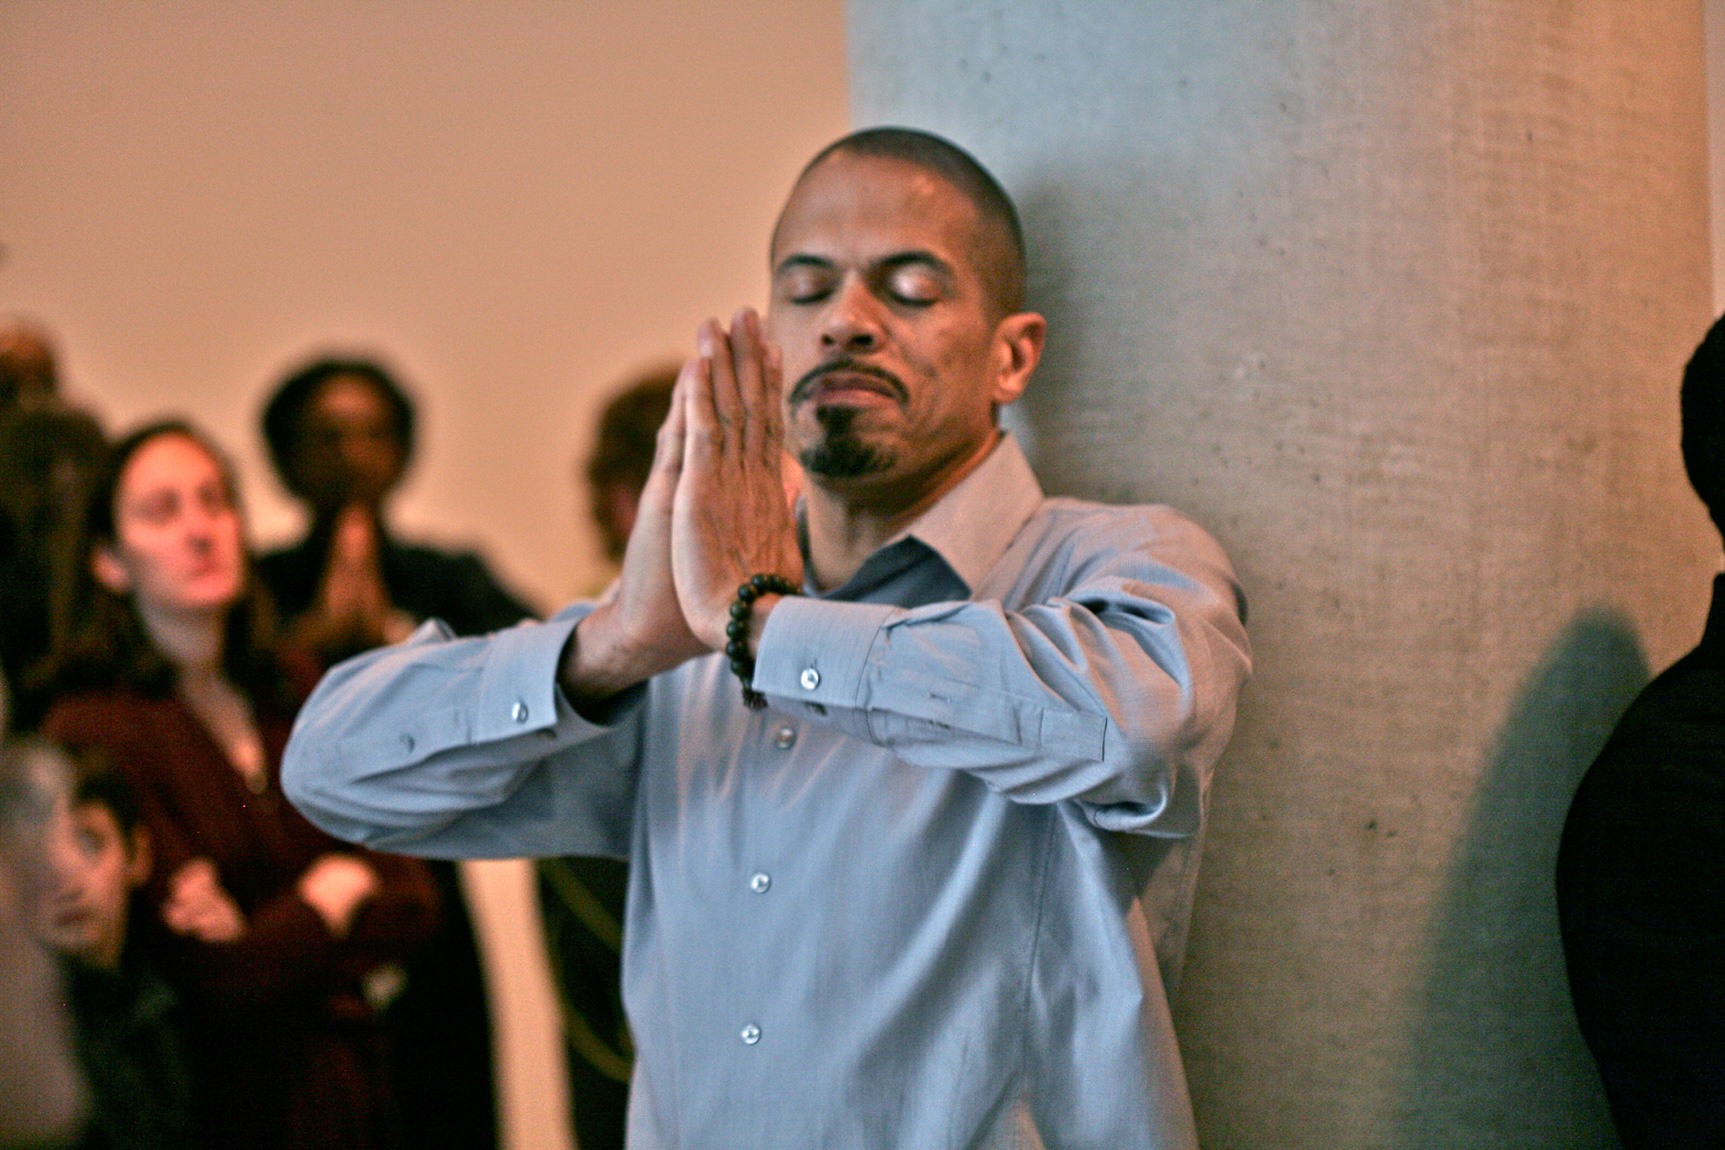 Participant raises hands in a praying pose with their back against a concrete pillar.